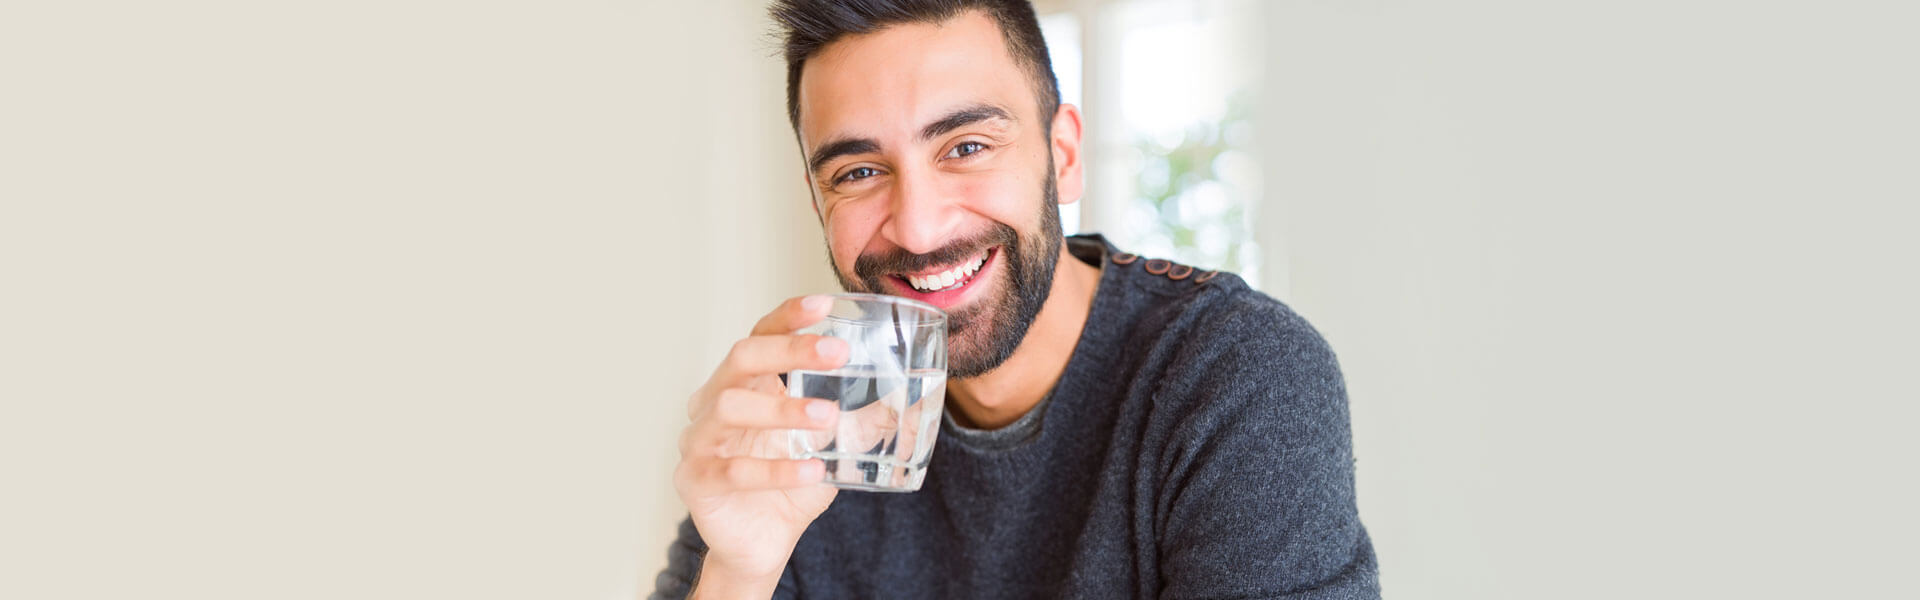 What Foods Can You Have and When after Fluoride Treatment? | Blog